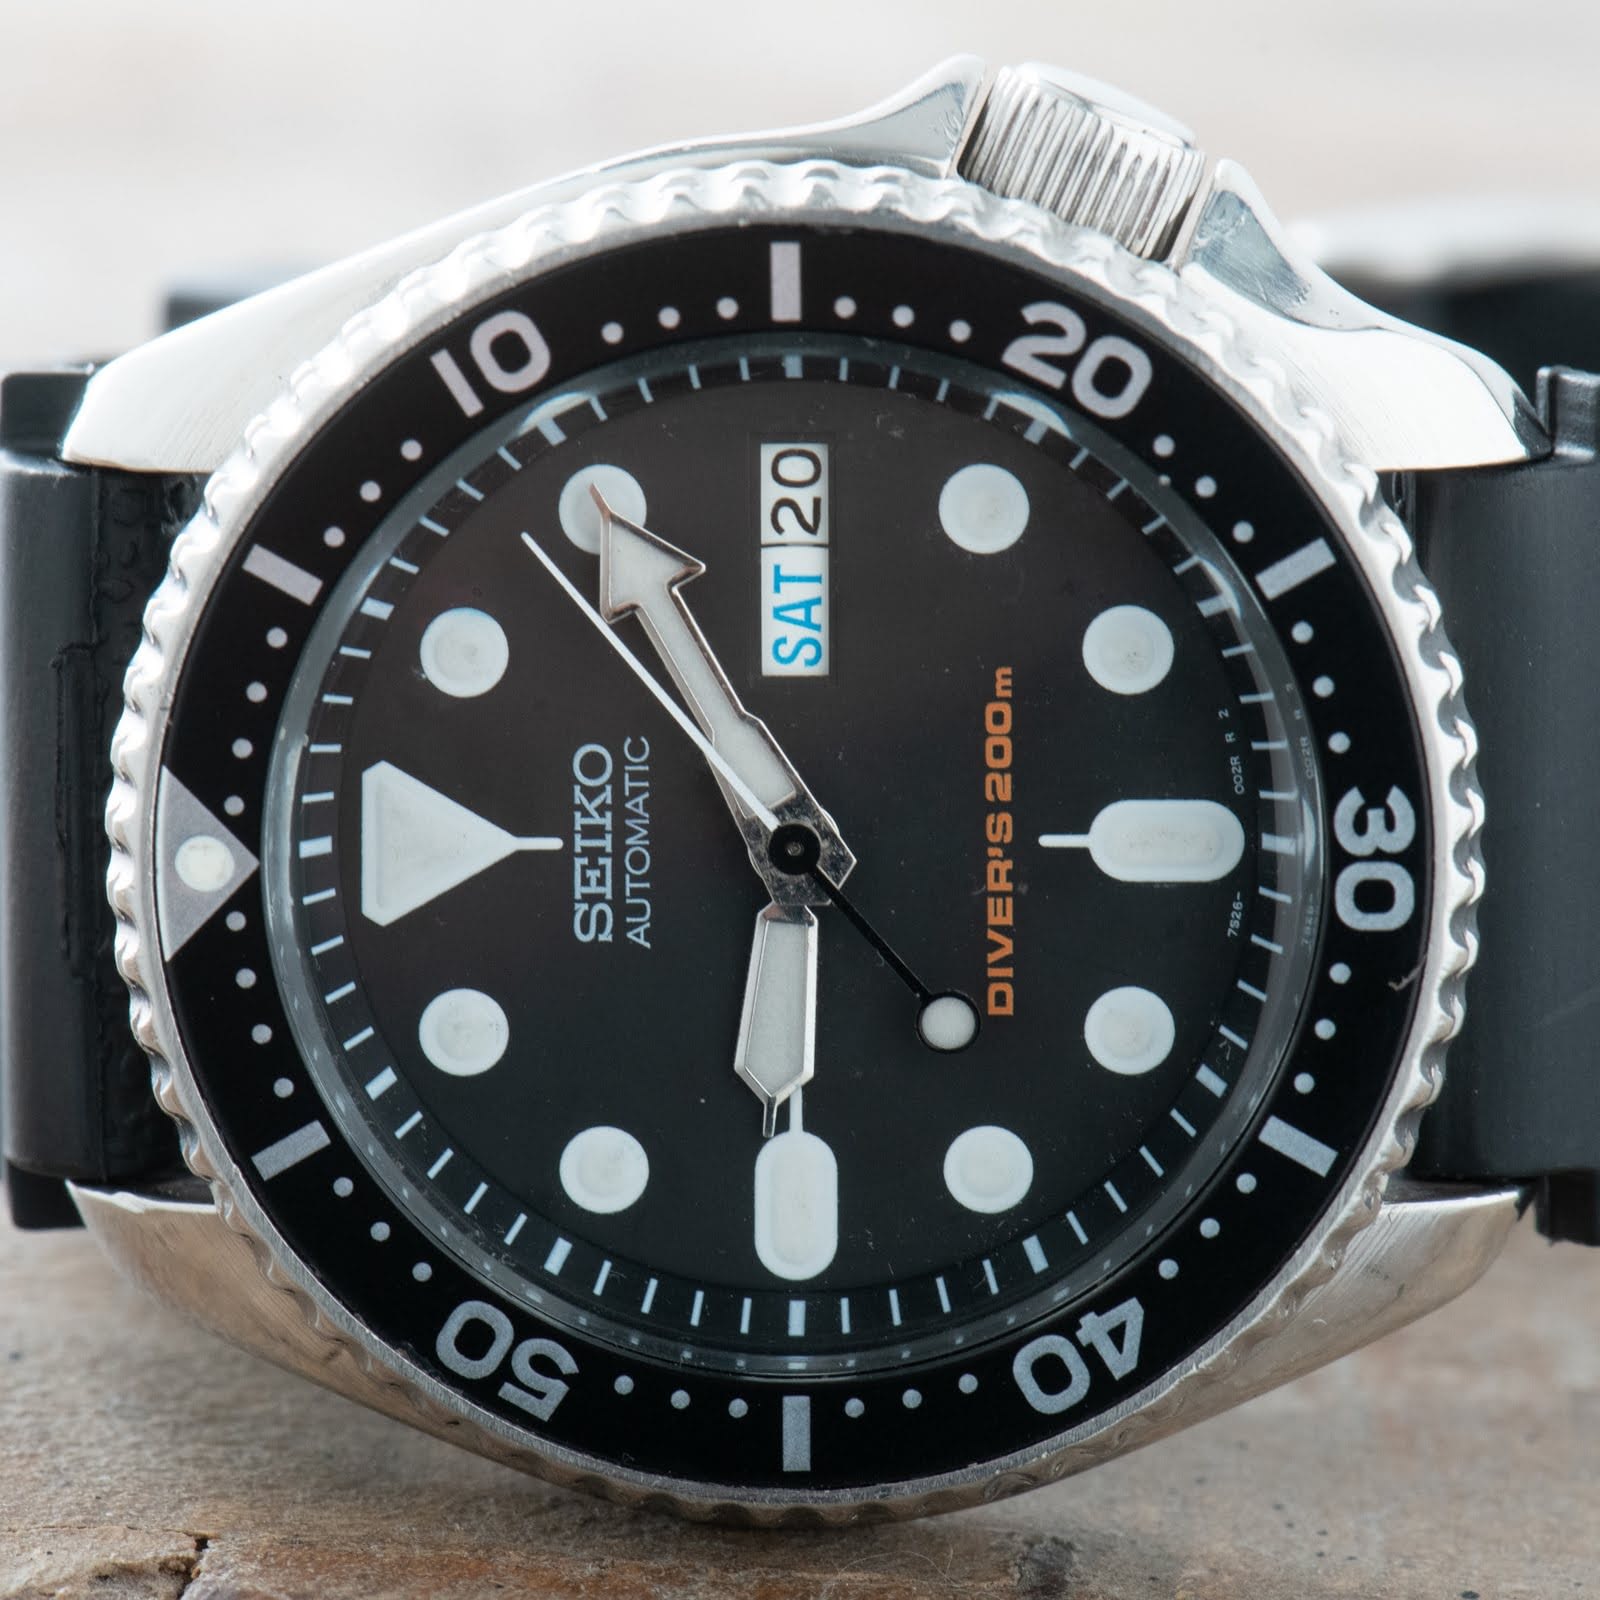 Seiko SKX007 Divers Watch Men Vintage Automatic Day Date ref. 7S26-0020 ...